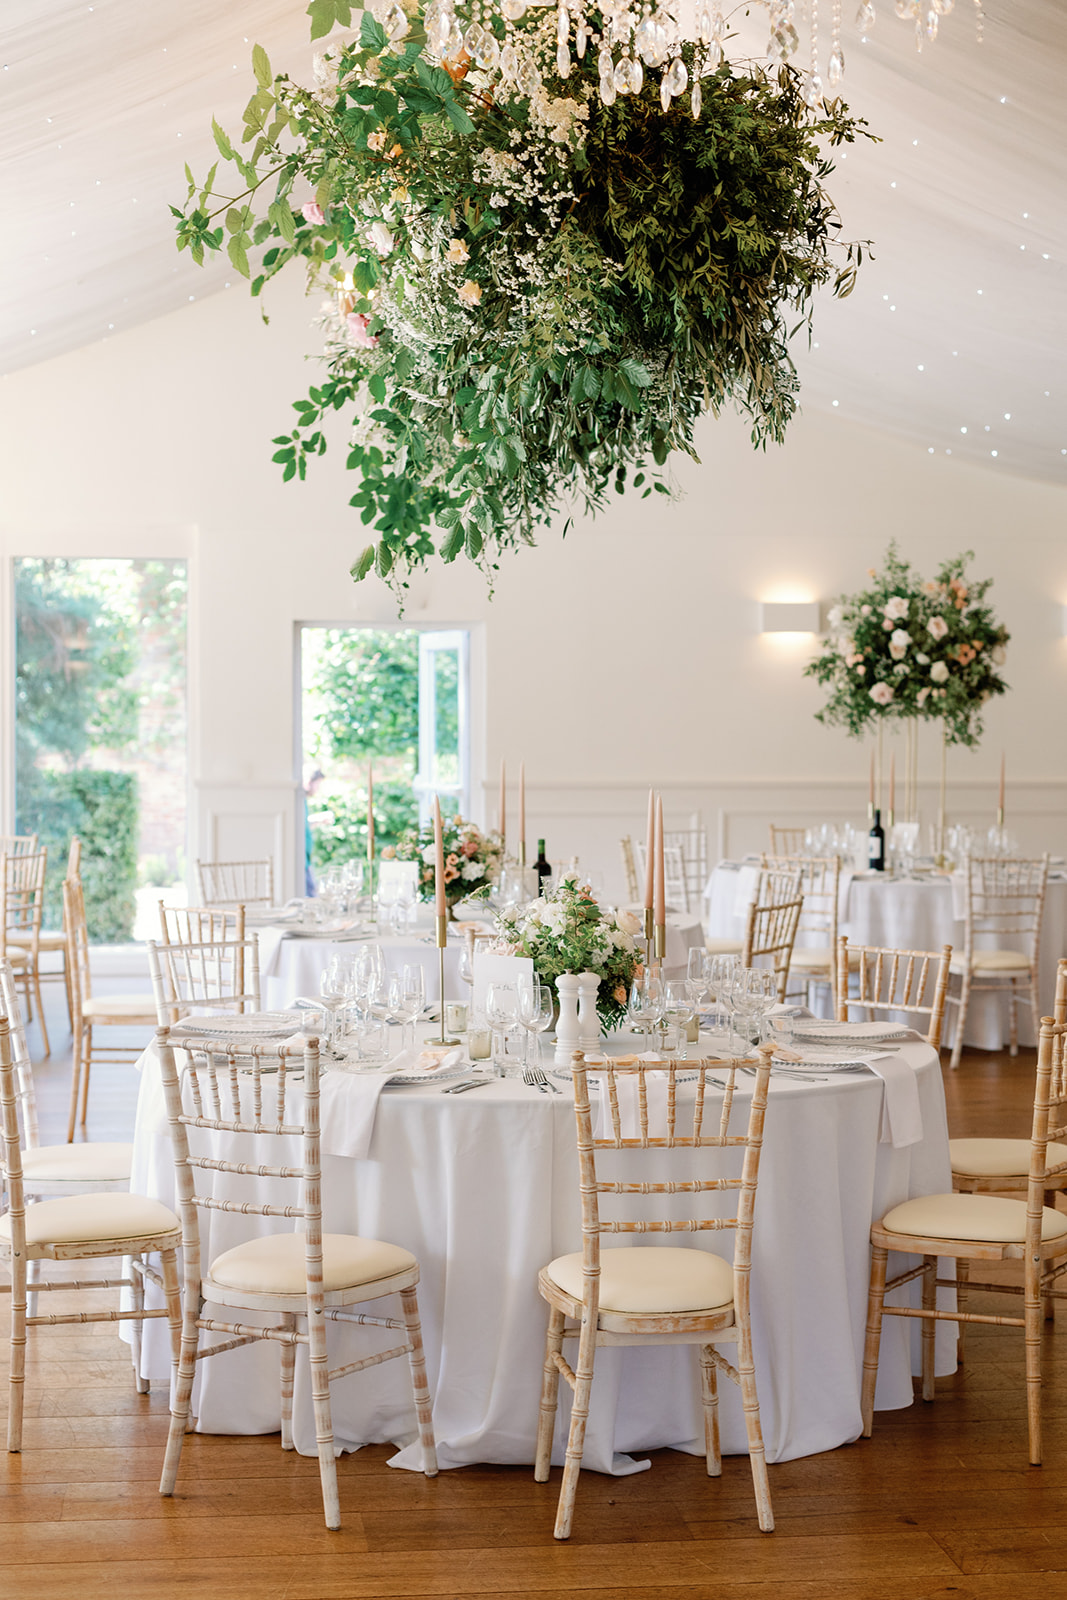 The ULTIMATE Blush Pink English Country Wedding at Iscoyd Park by Jade Osborne Photography